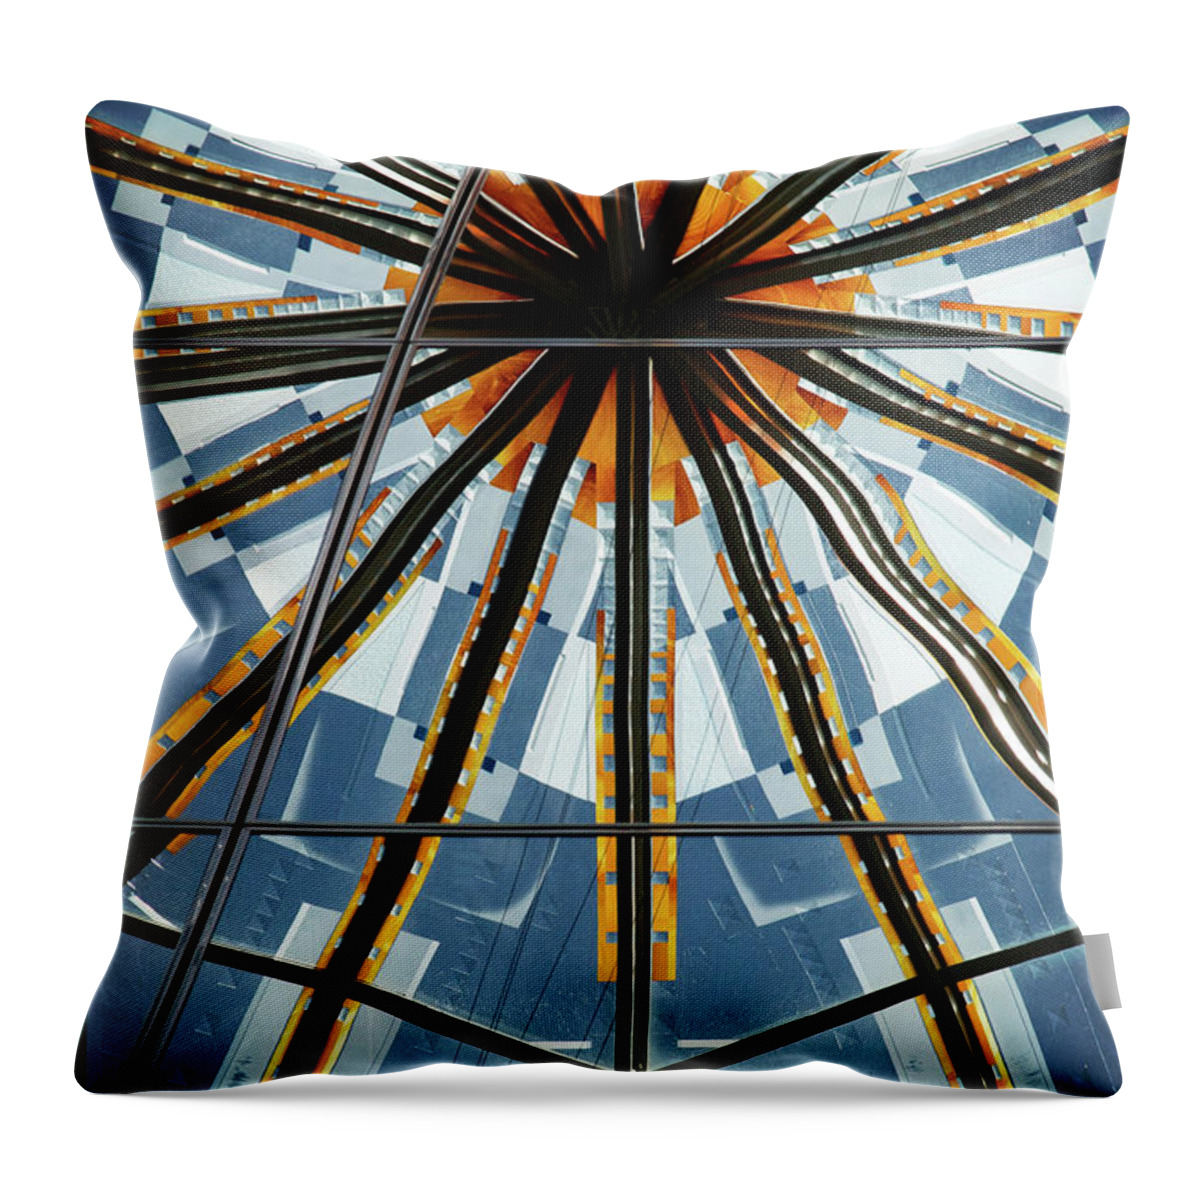 Photograph Throw Pillow featuring the photograph Starburst by Kathy Strauss